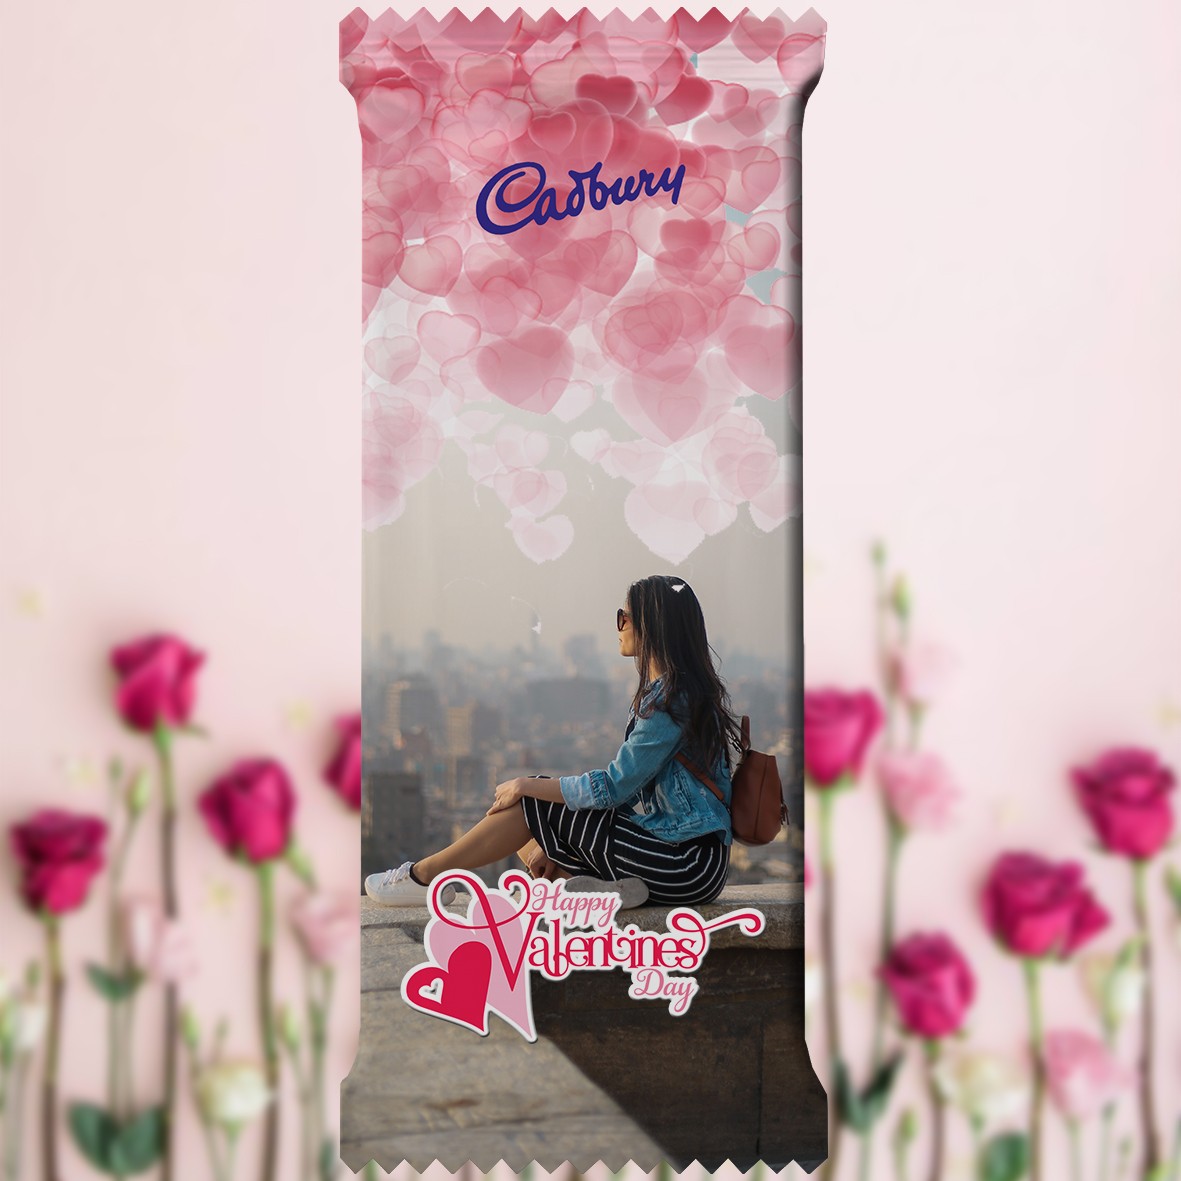 Valentine's Day Special Cadbury Dairy Milk Fruit and Nut (80g) wrapped in Customized Photo Printed Wrapper (Type 03)